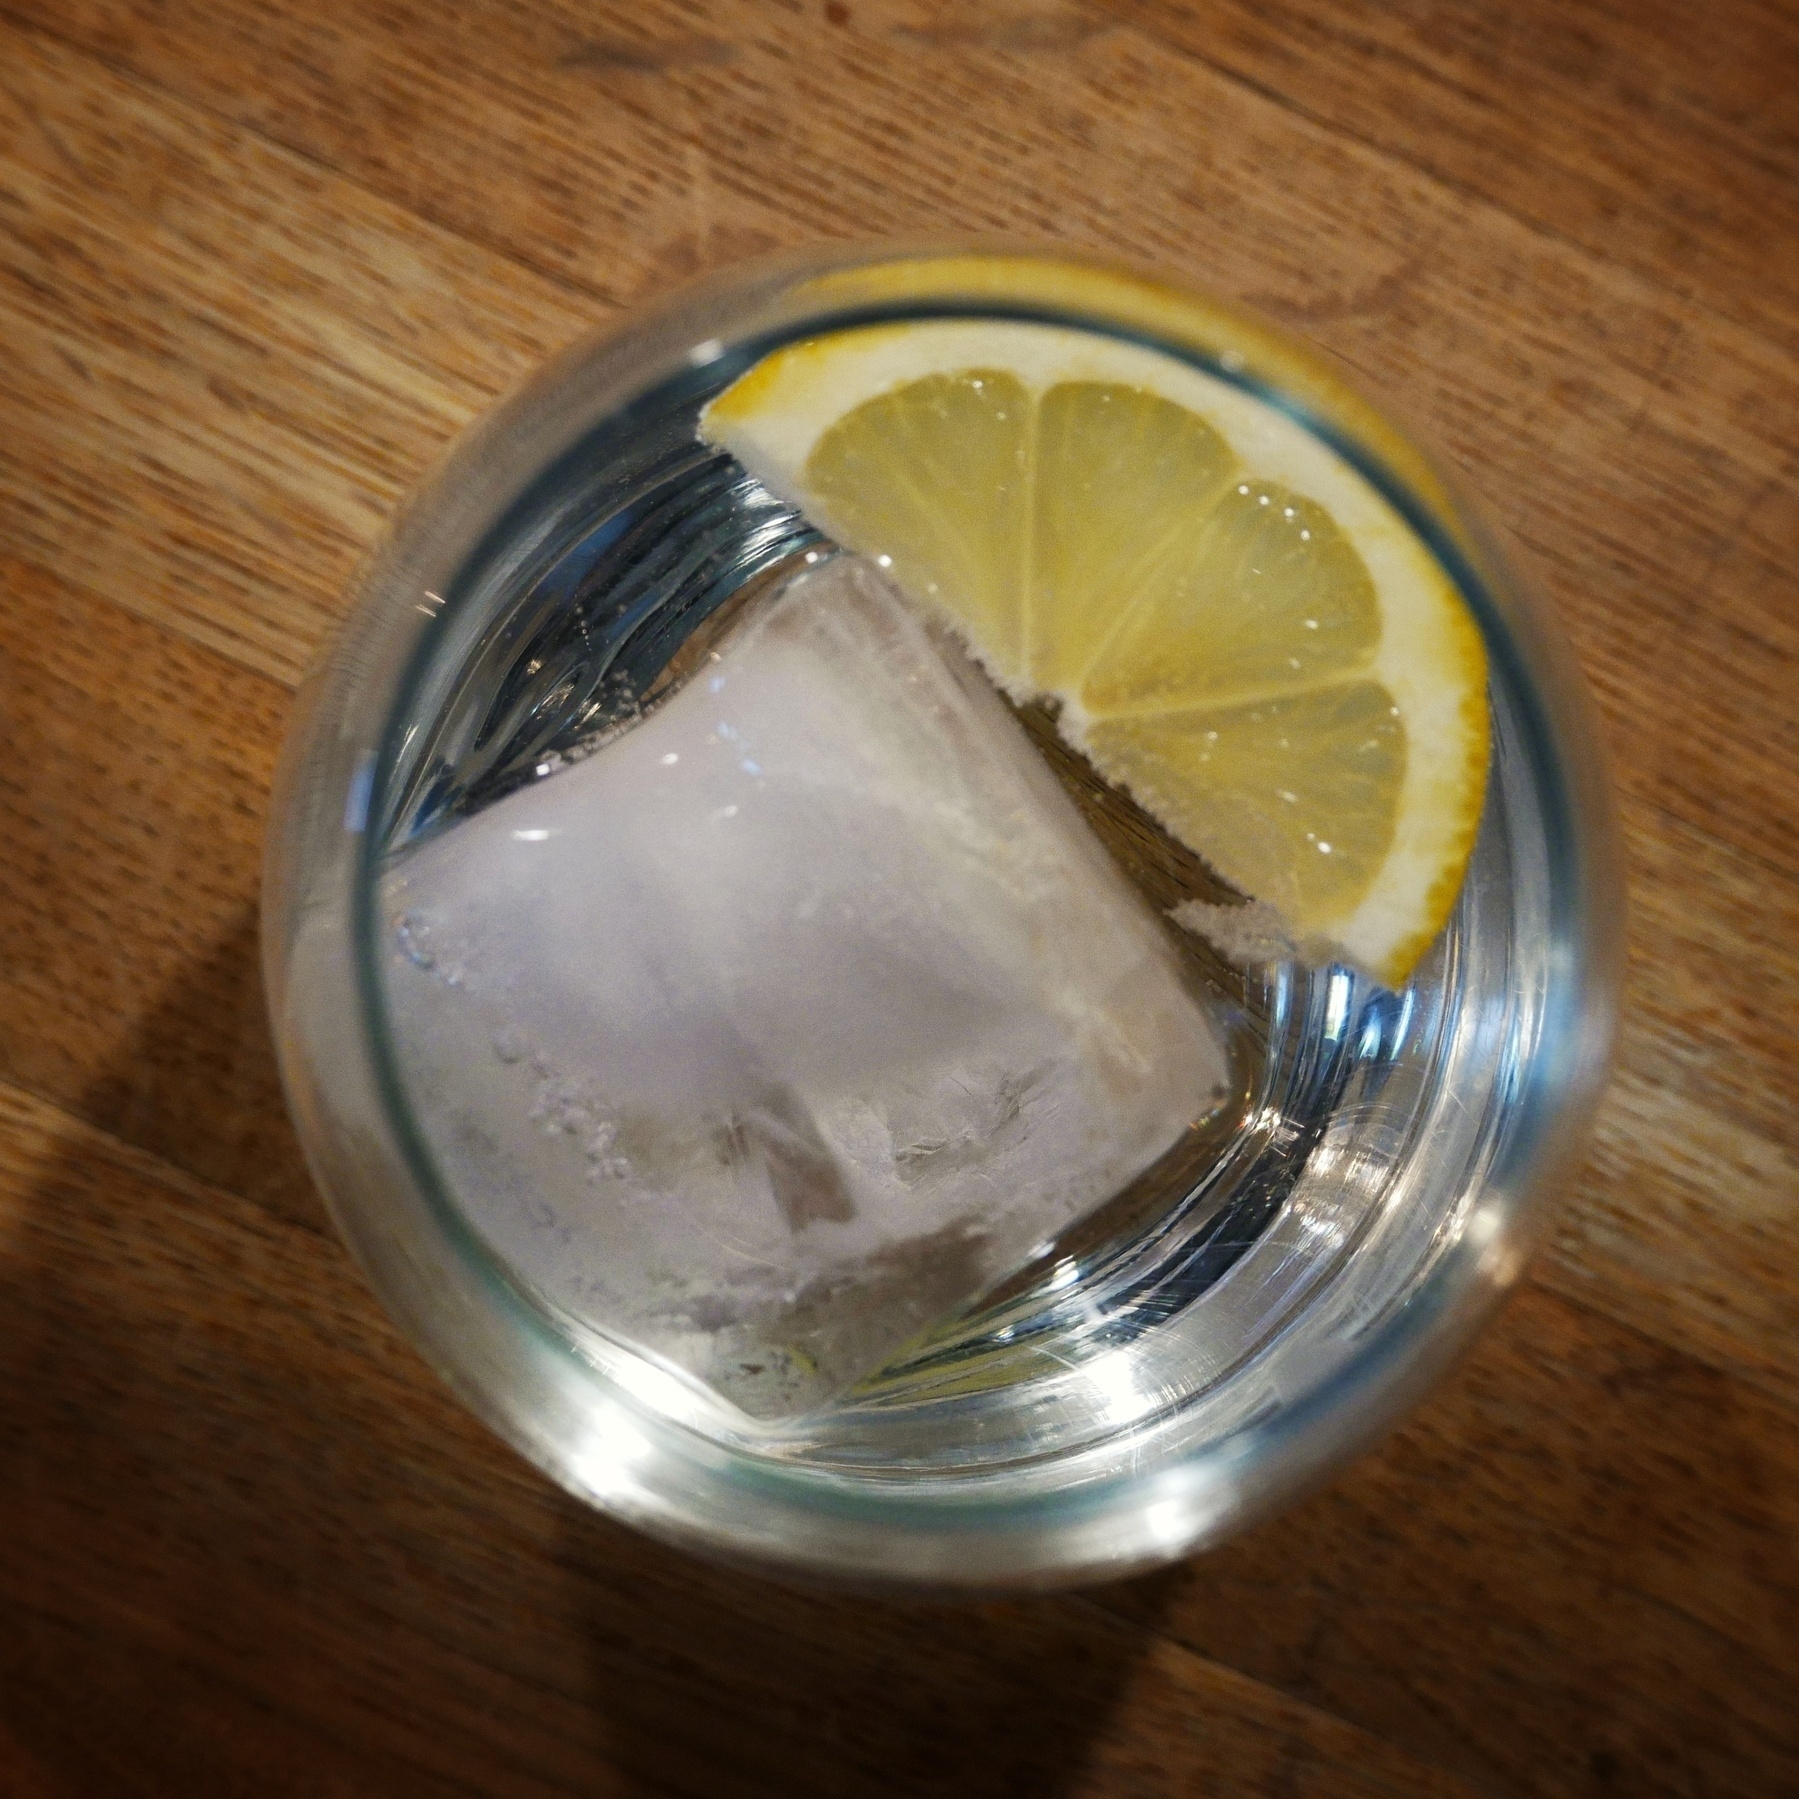 A top-down view of a glass of clear liquid with a large ice cube and wedge of lemon, placed on a wooden surface